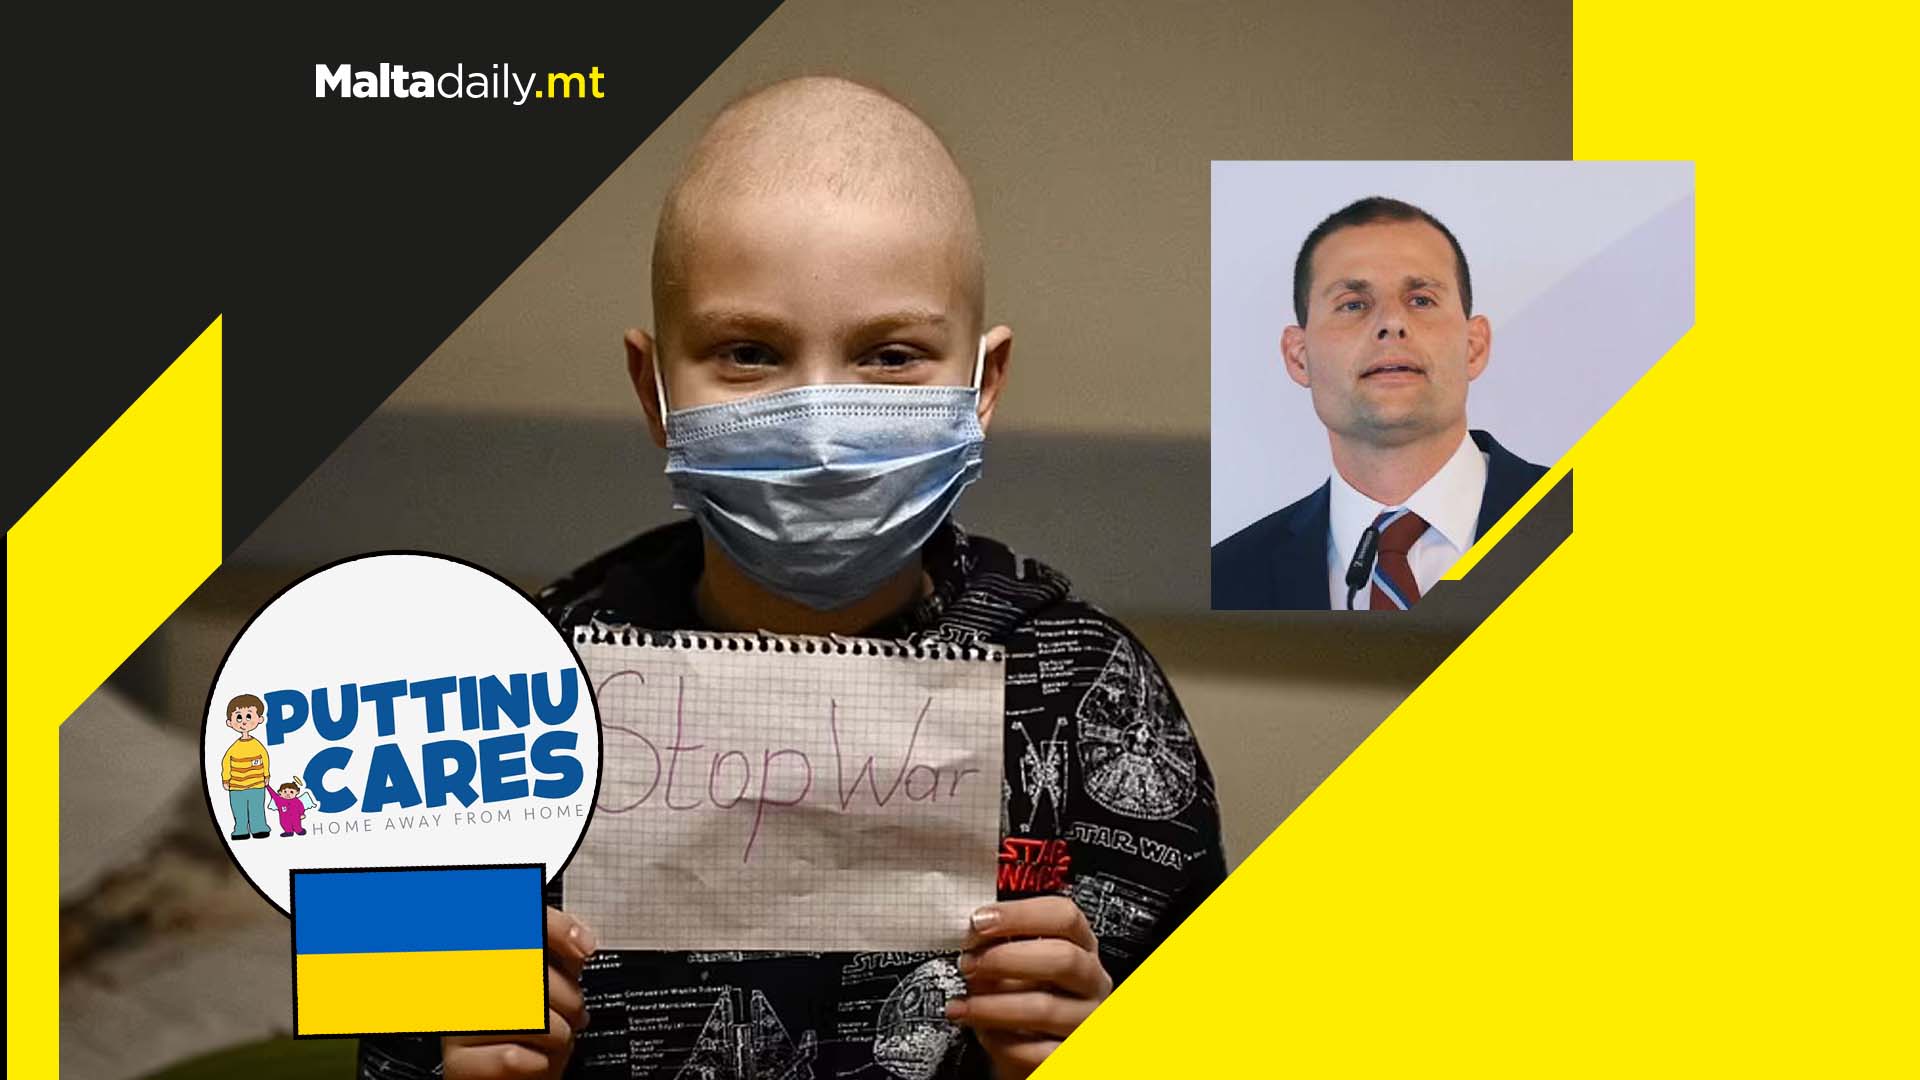 First Ukrainian child cancer patient due to arrive in Malta